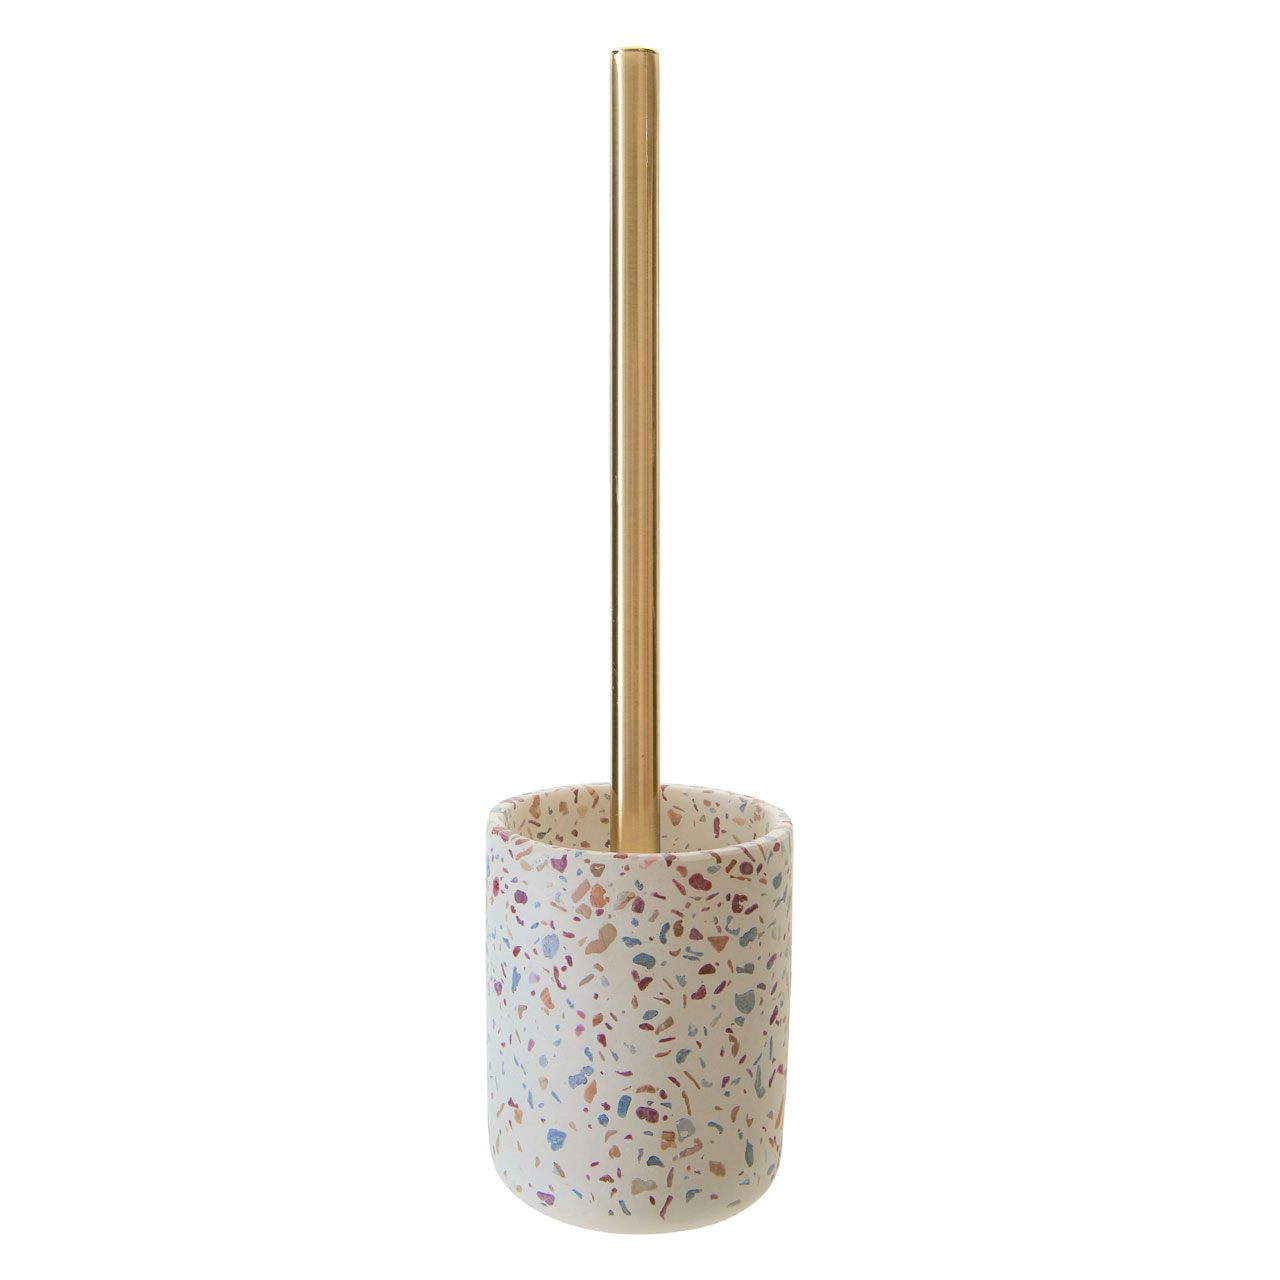 Accents Goza concrete conglomerate beige toilet brush and holder